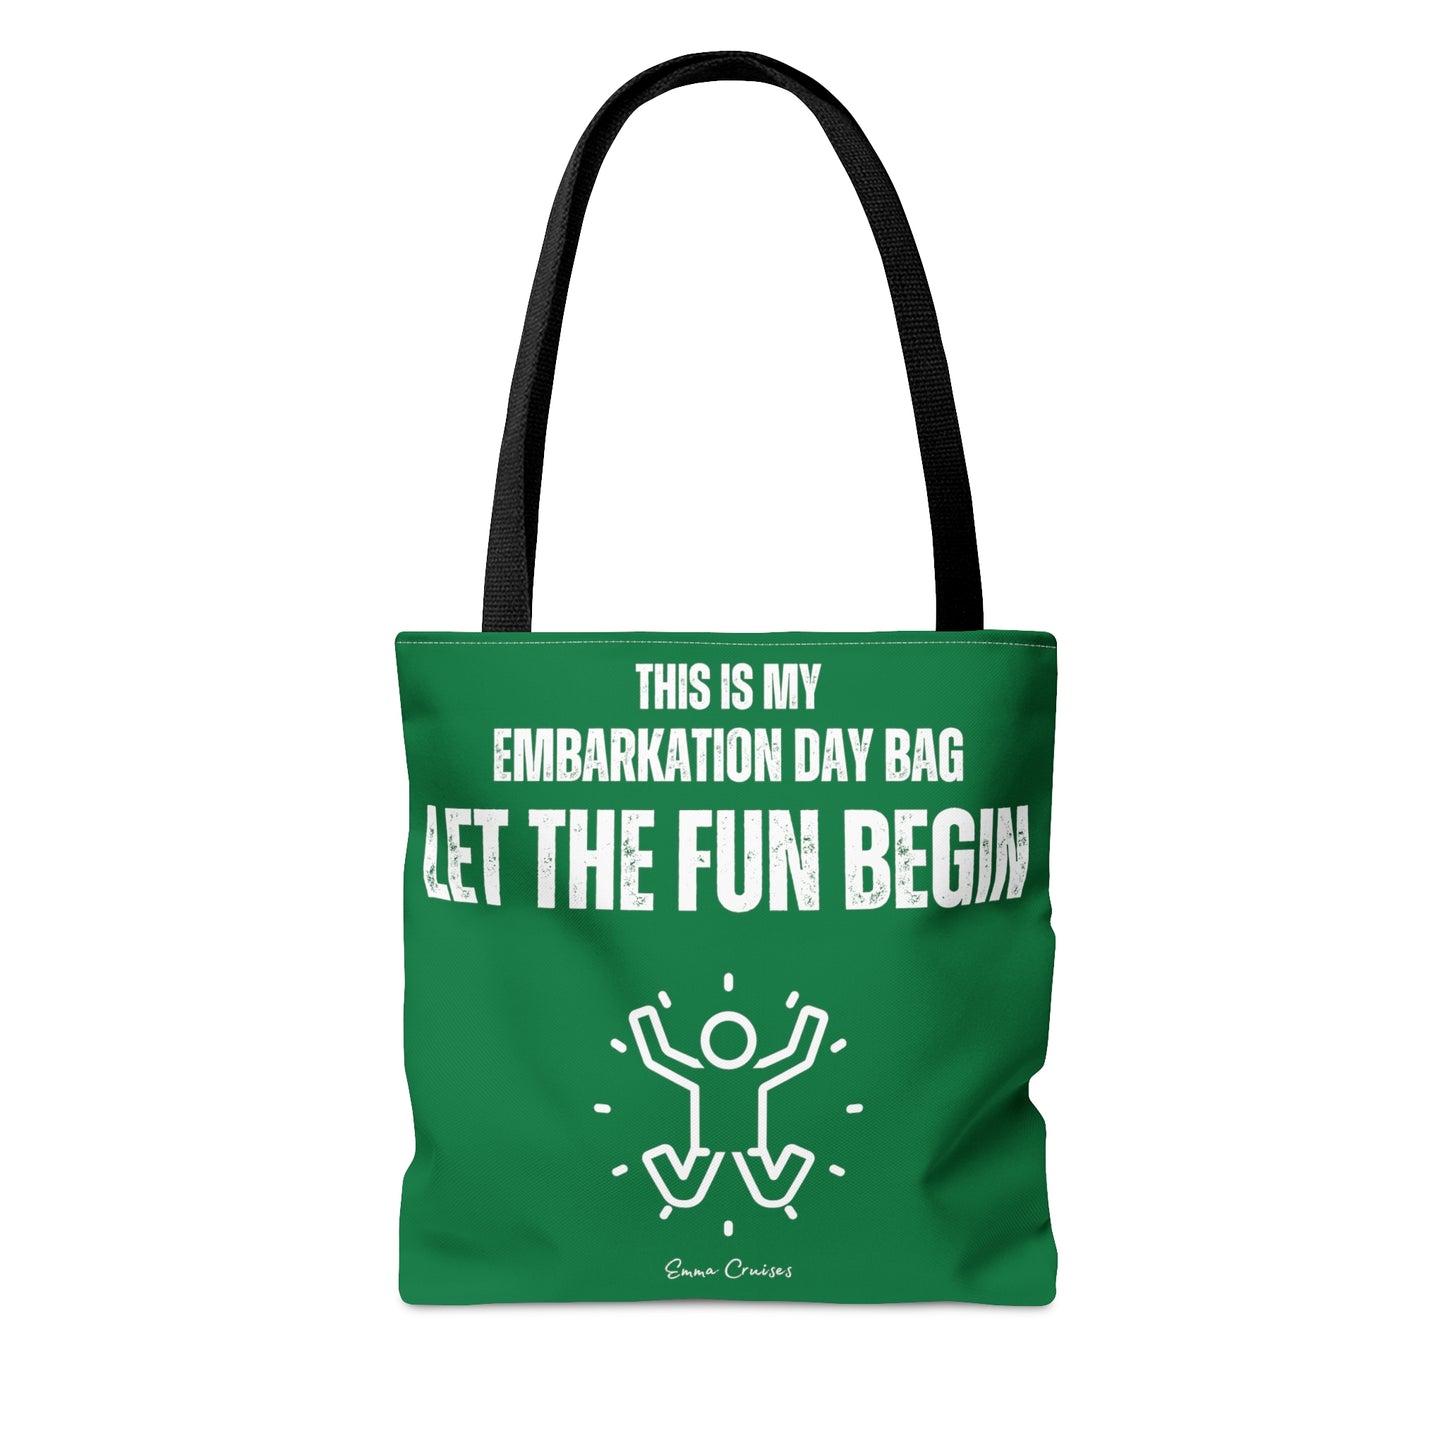 This is My Embarkation Day Bag - Bag